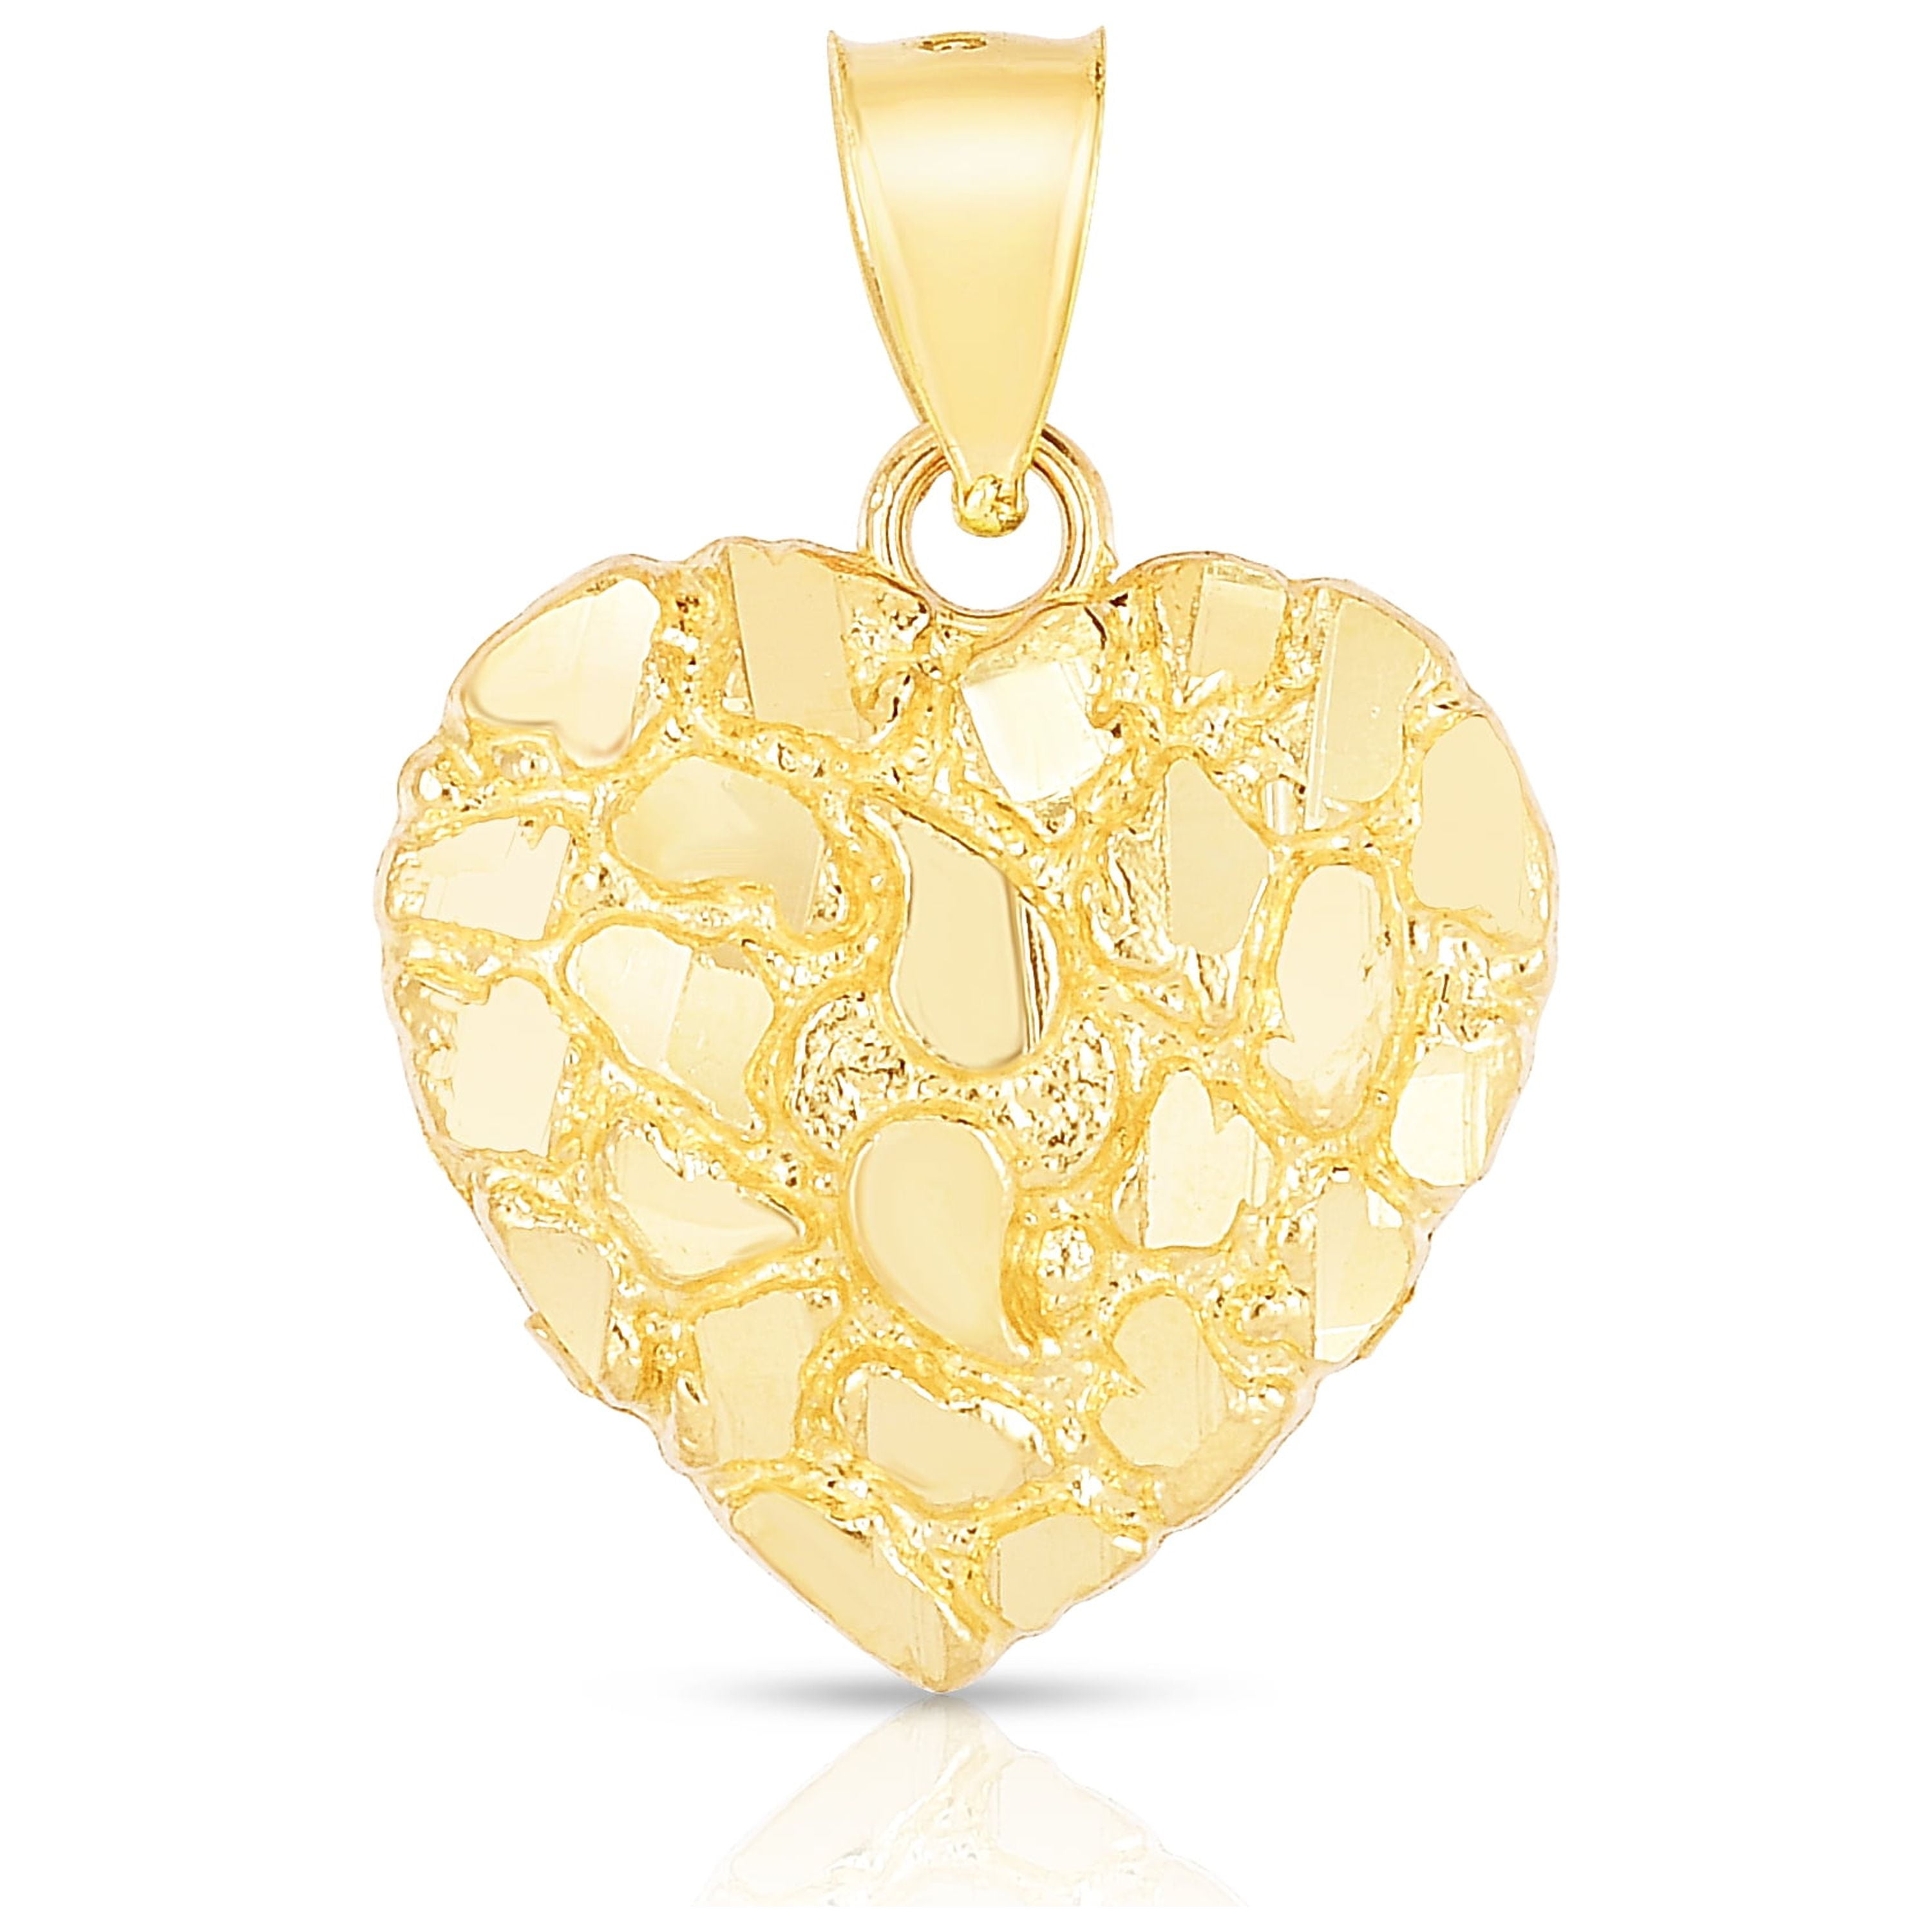 Gold on Sterling Silver Heart Nugget Pendant – David Smith Jewellery